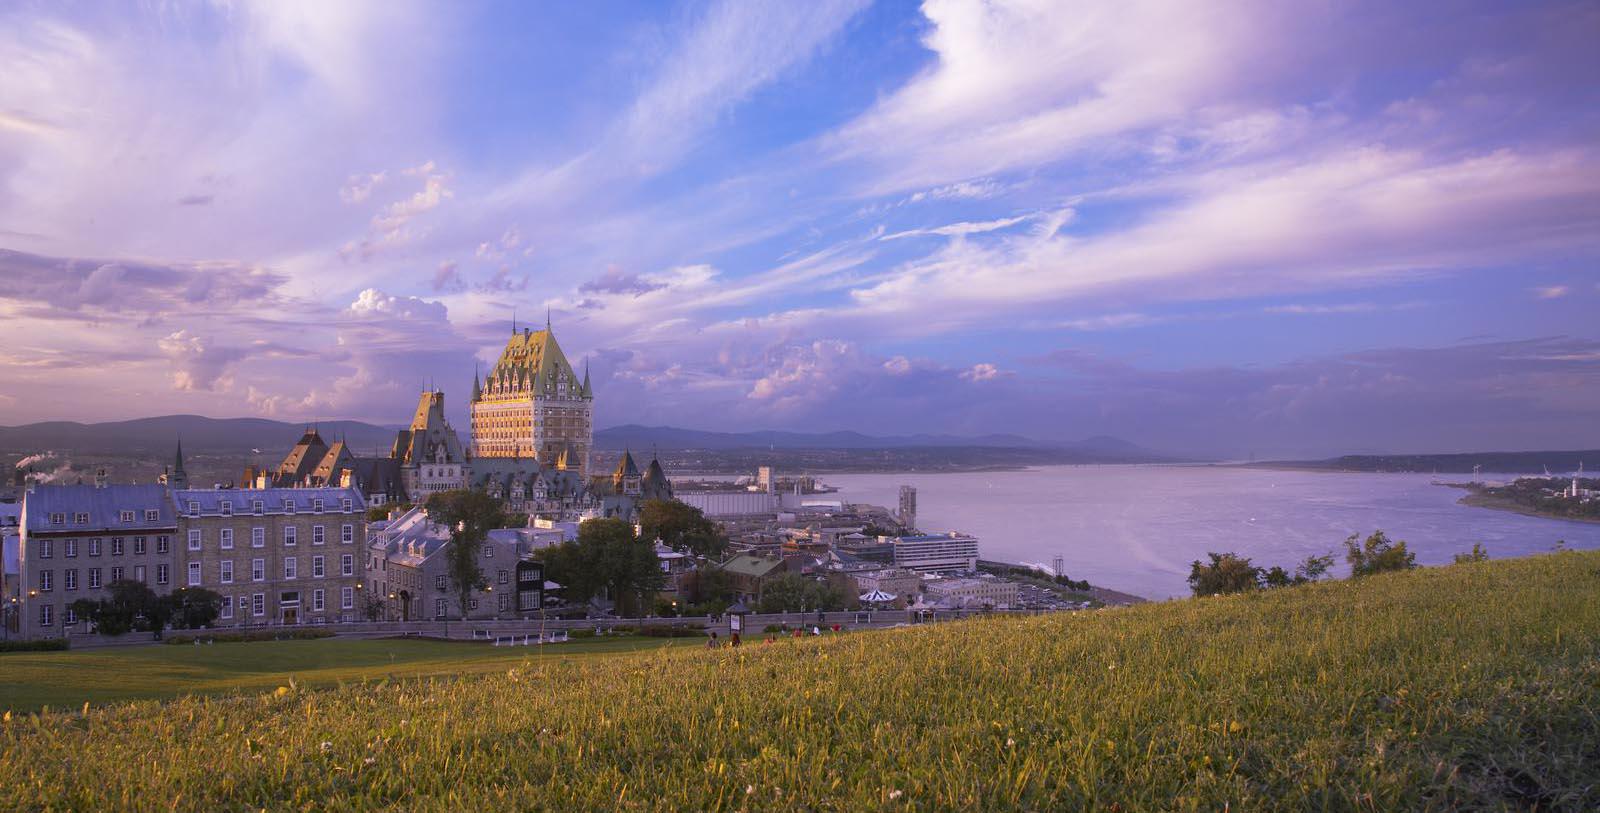 Discover the Châteauesque architecture of this spectacular destination.